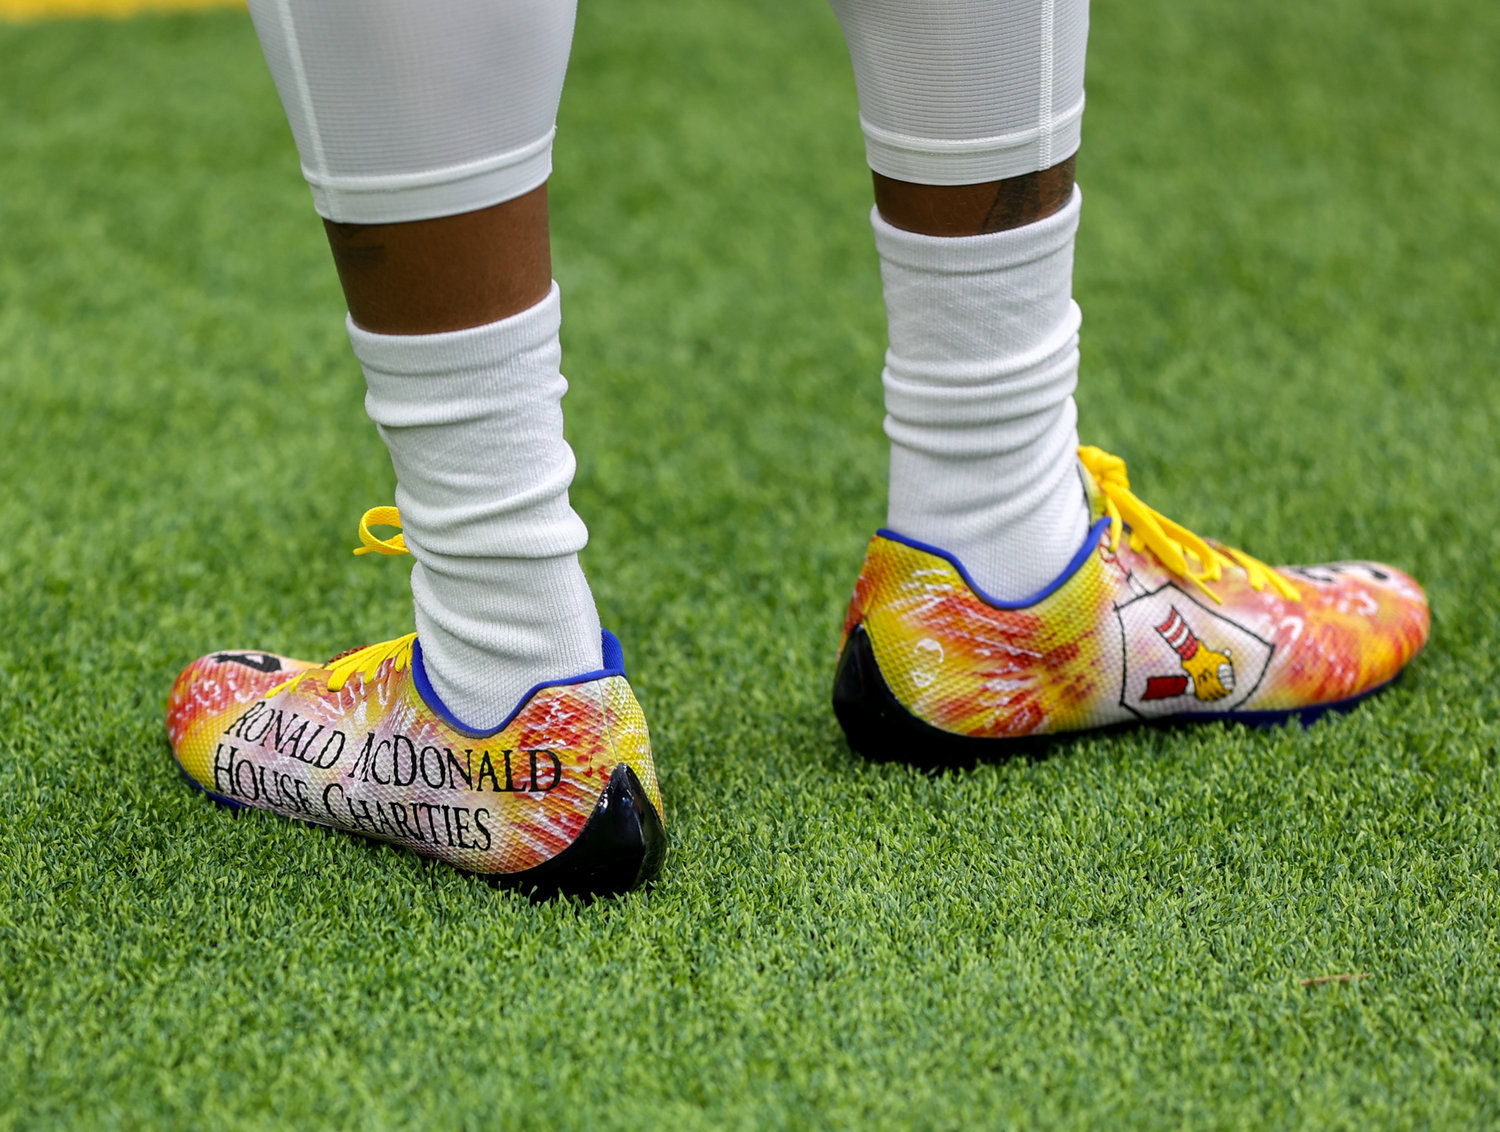 Players wear custom cleats for My Cause My Cleats day during an NFL game between the Texans and the Colts on December 5, 2021 in Houston, Texas.